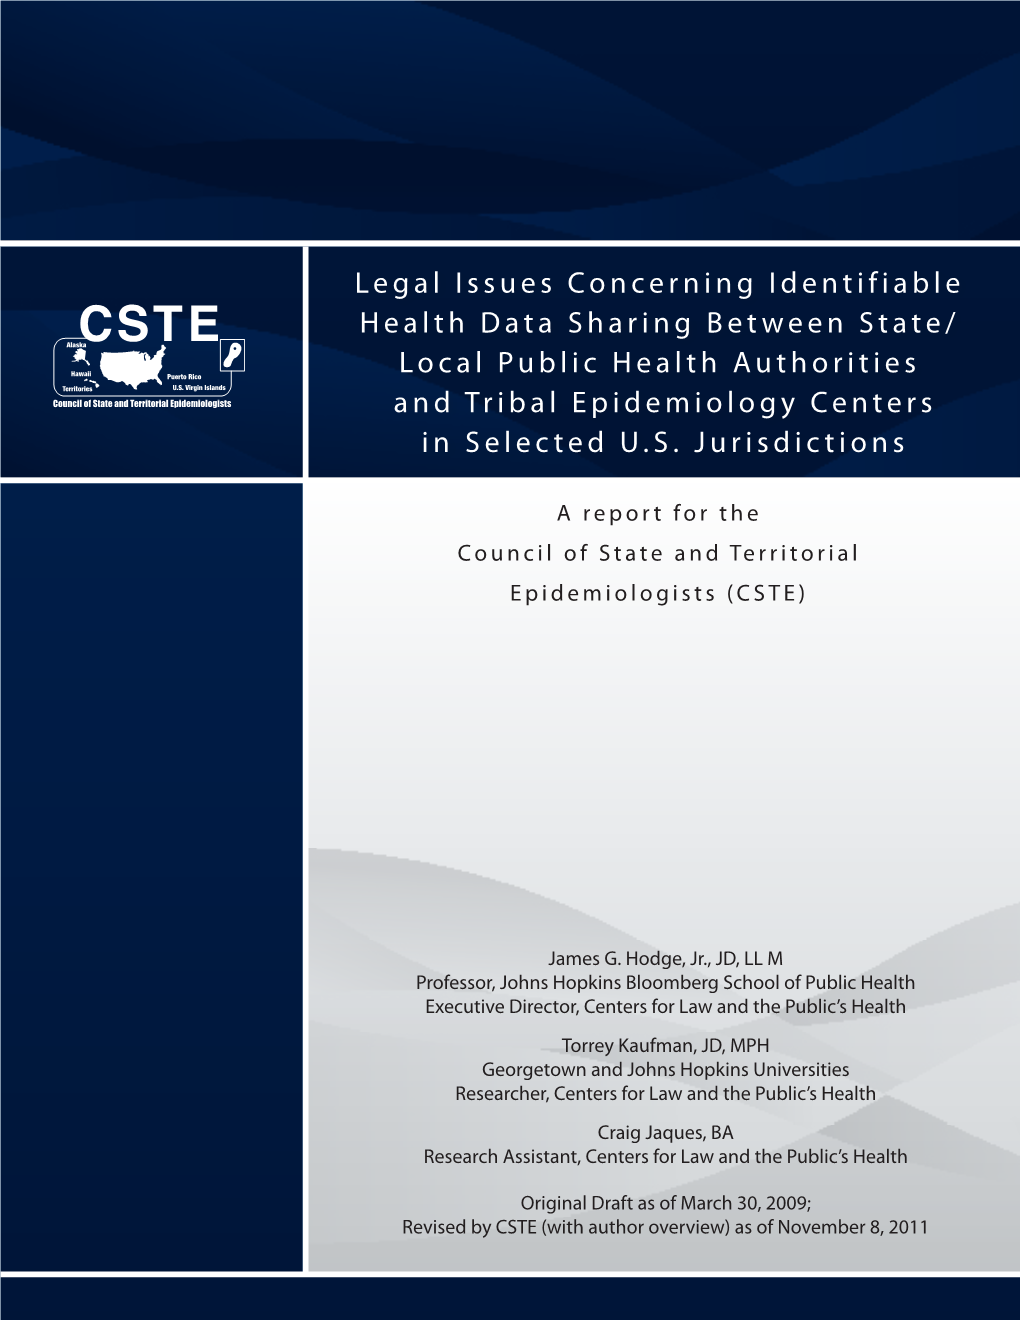 Legal Issues Concerning Identifiable Health Data Sharing Between State/ Local Public Health Authorities and Tribal Epidemiology Centers in Selected U.S